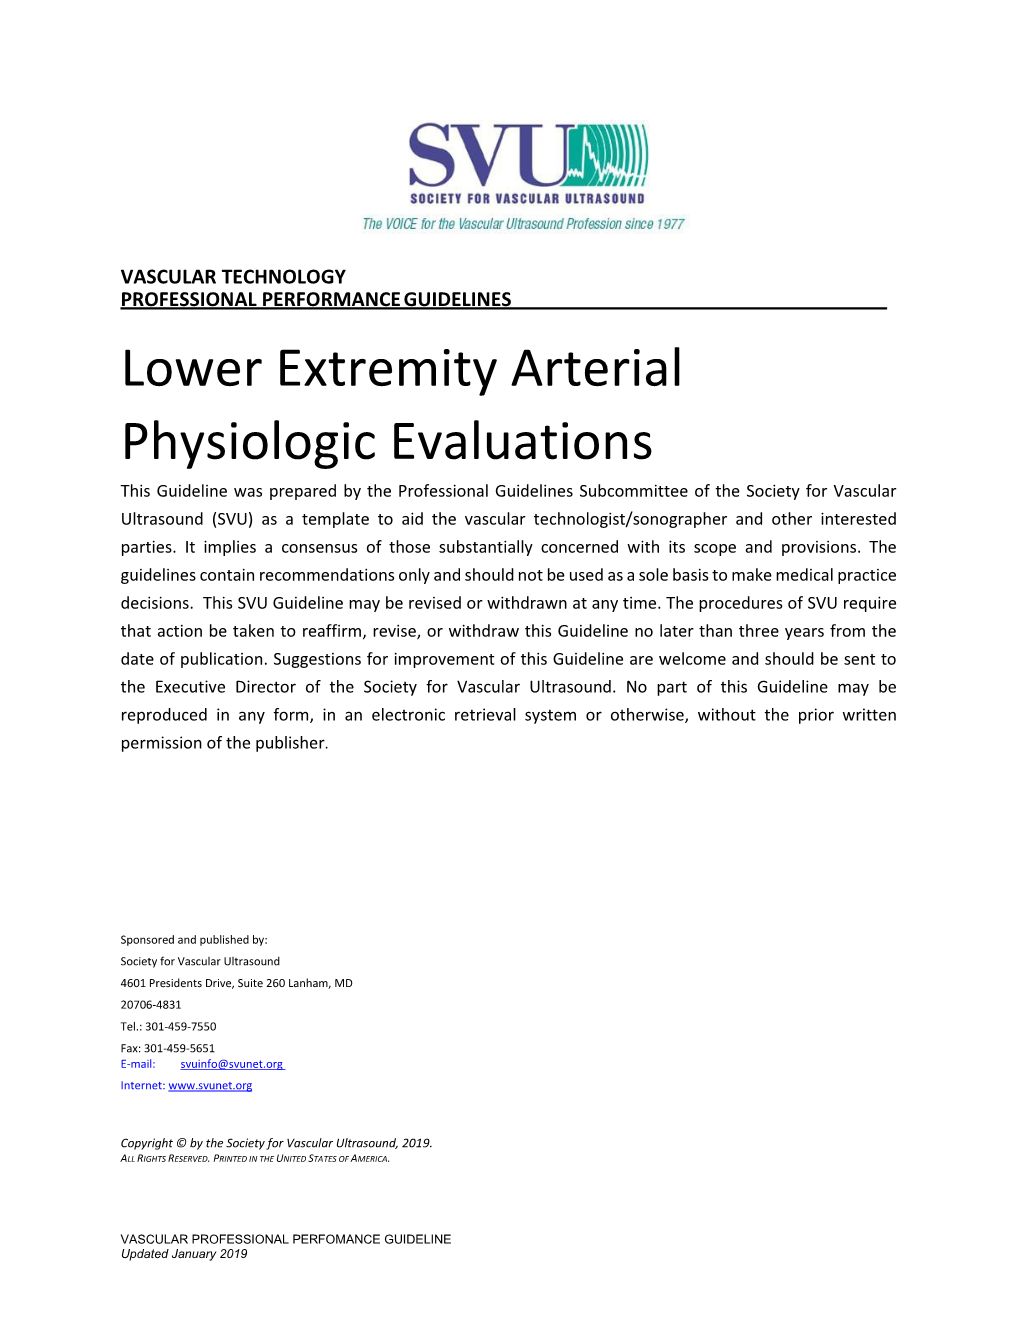 Lower Extremity Arterial Physiologic Evaluations